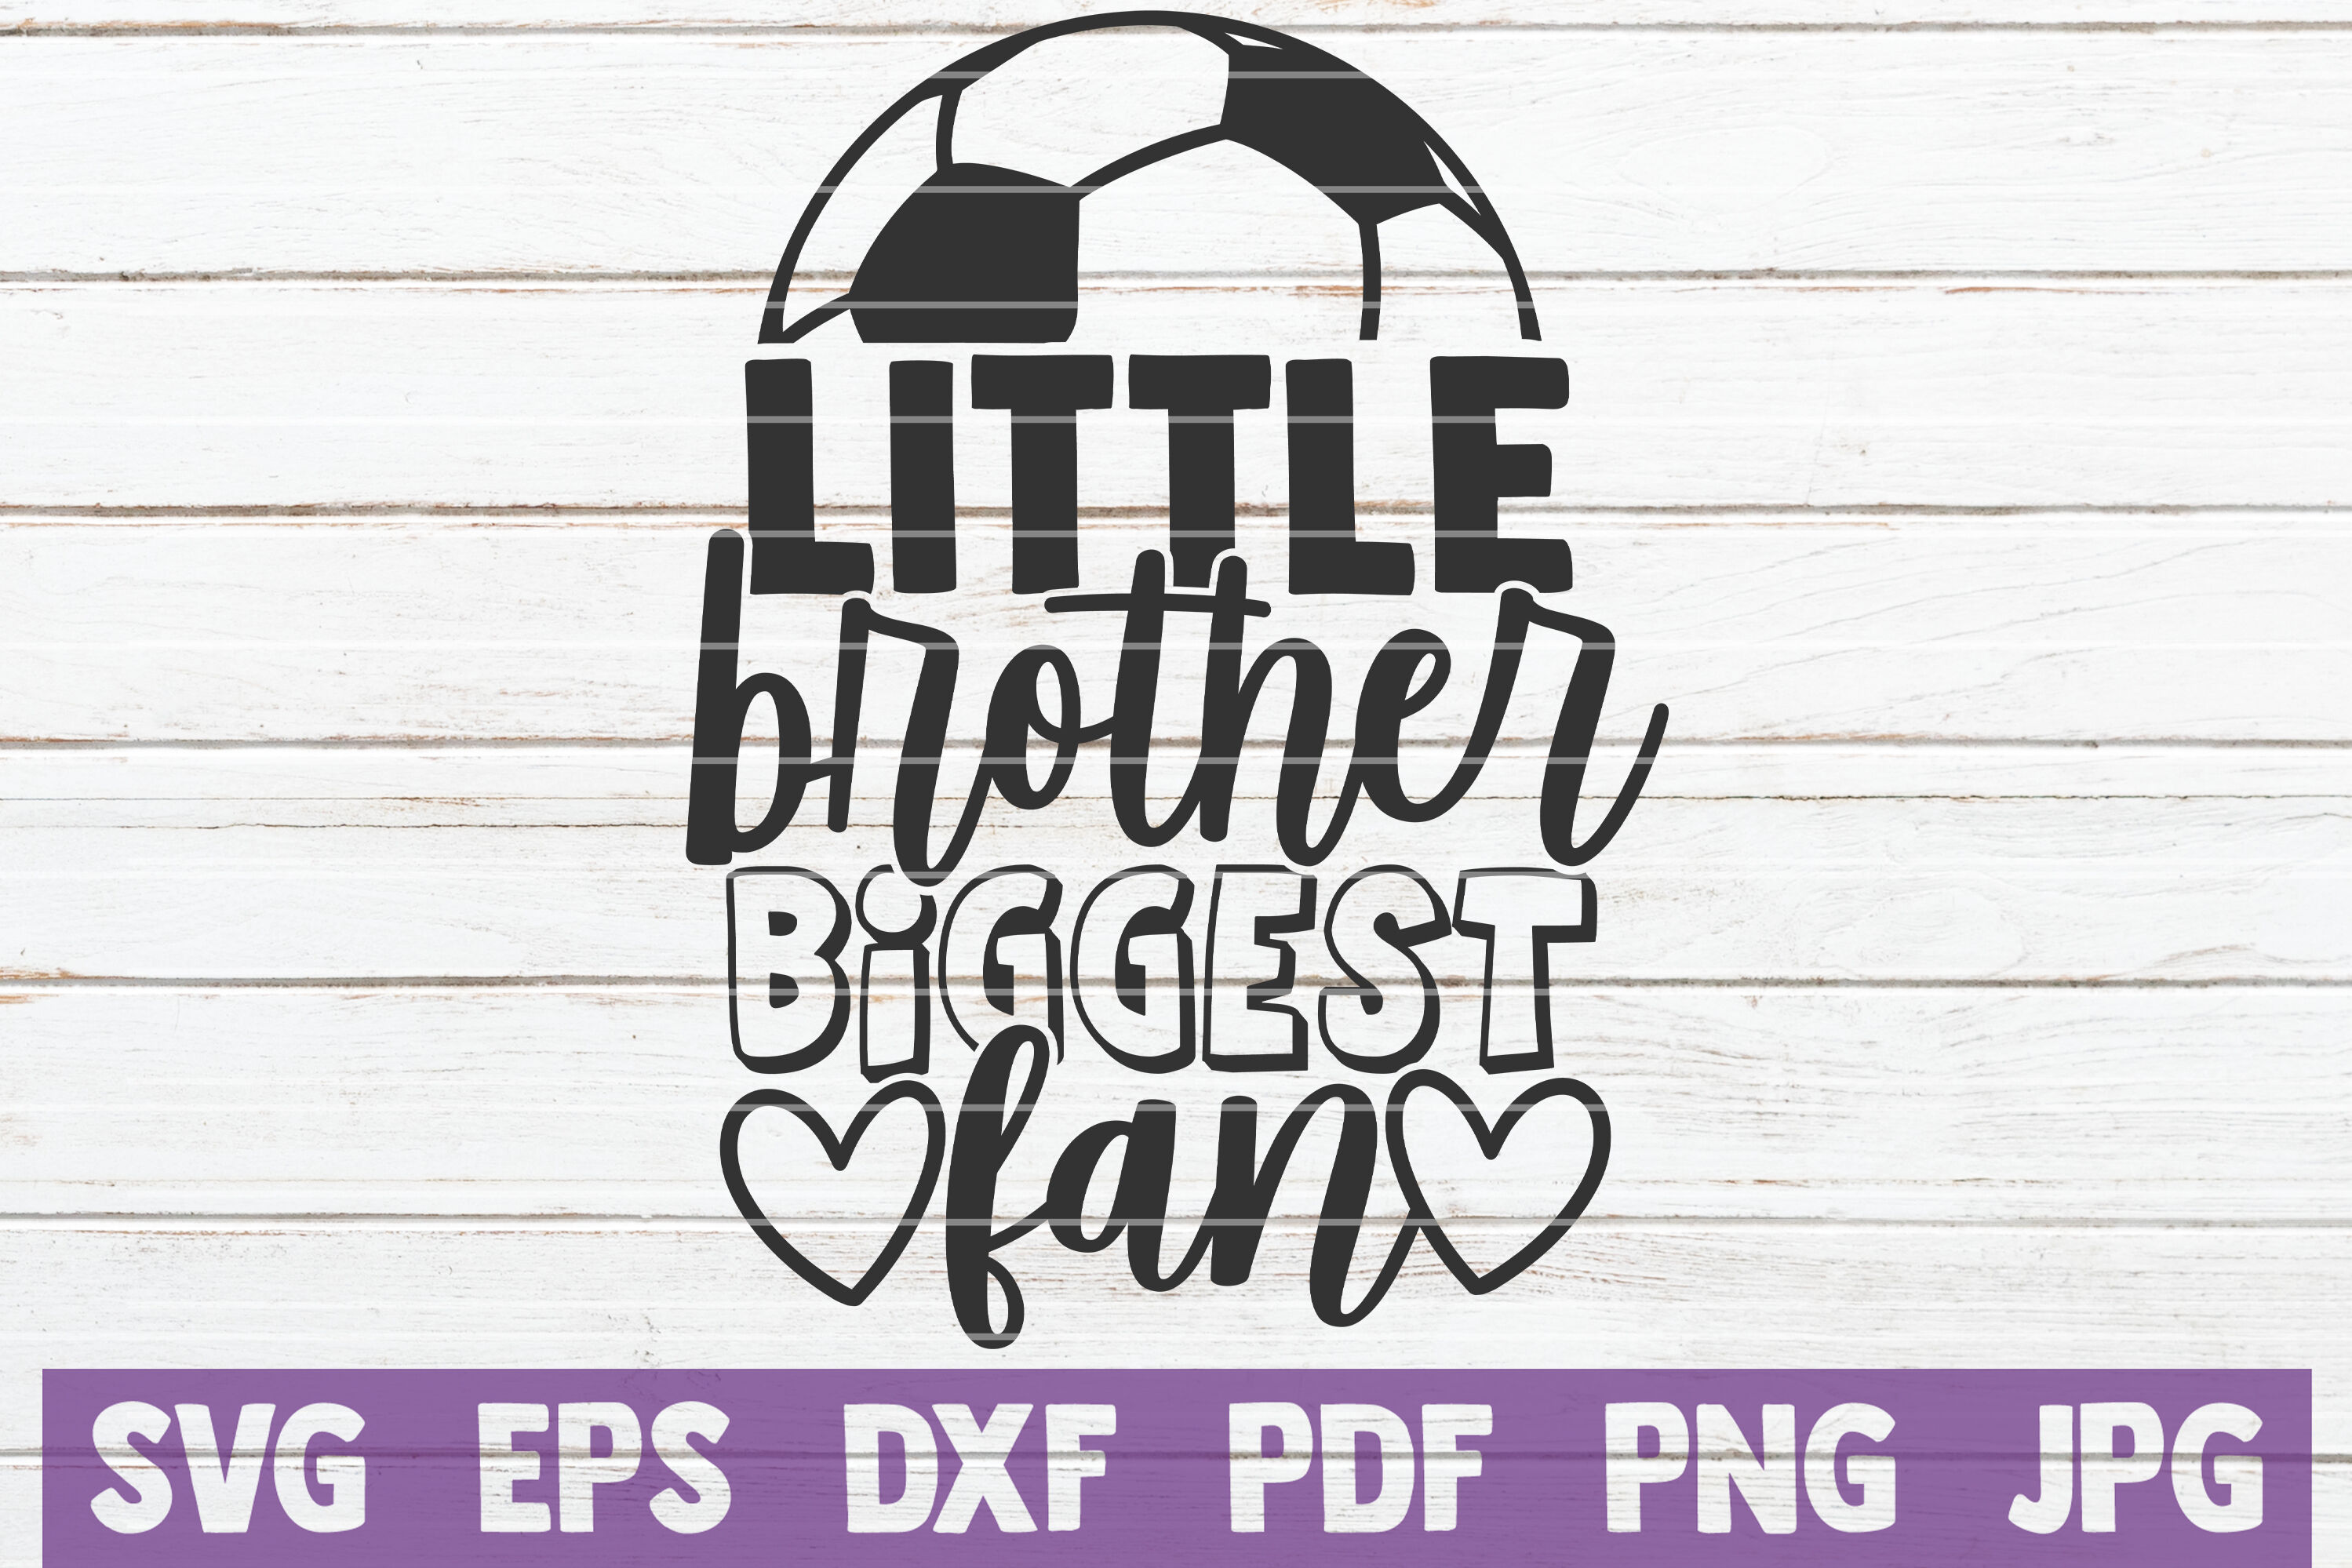 Little Brother Biggest Fan SVG Cut File By MintyMarshmallows ...